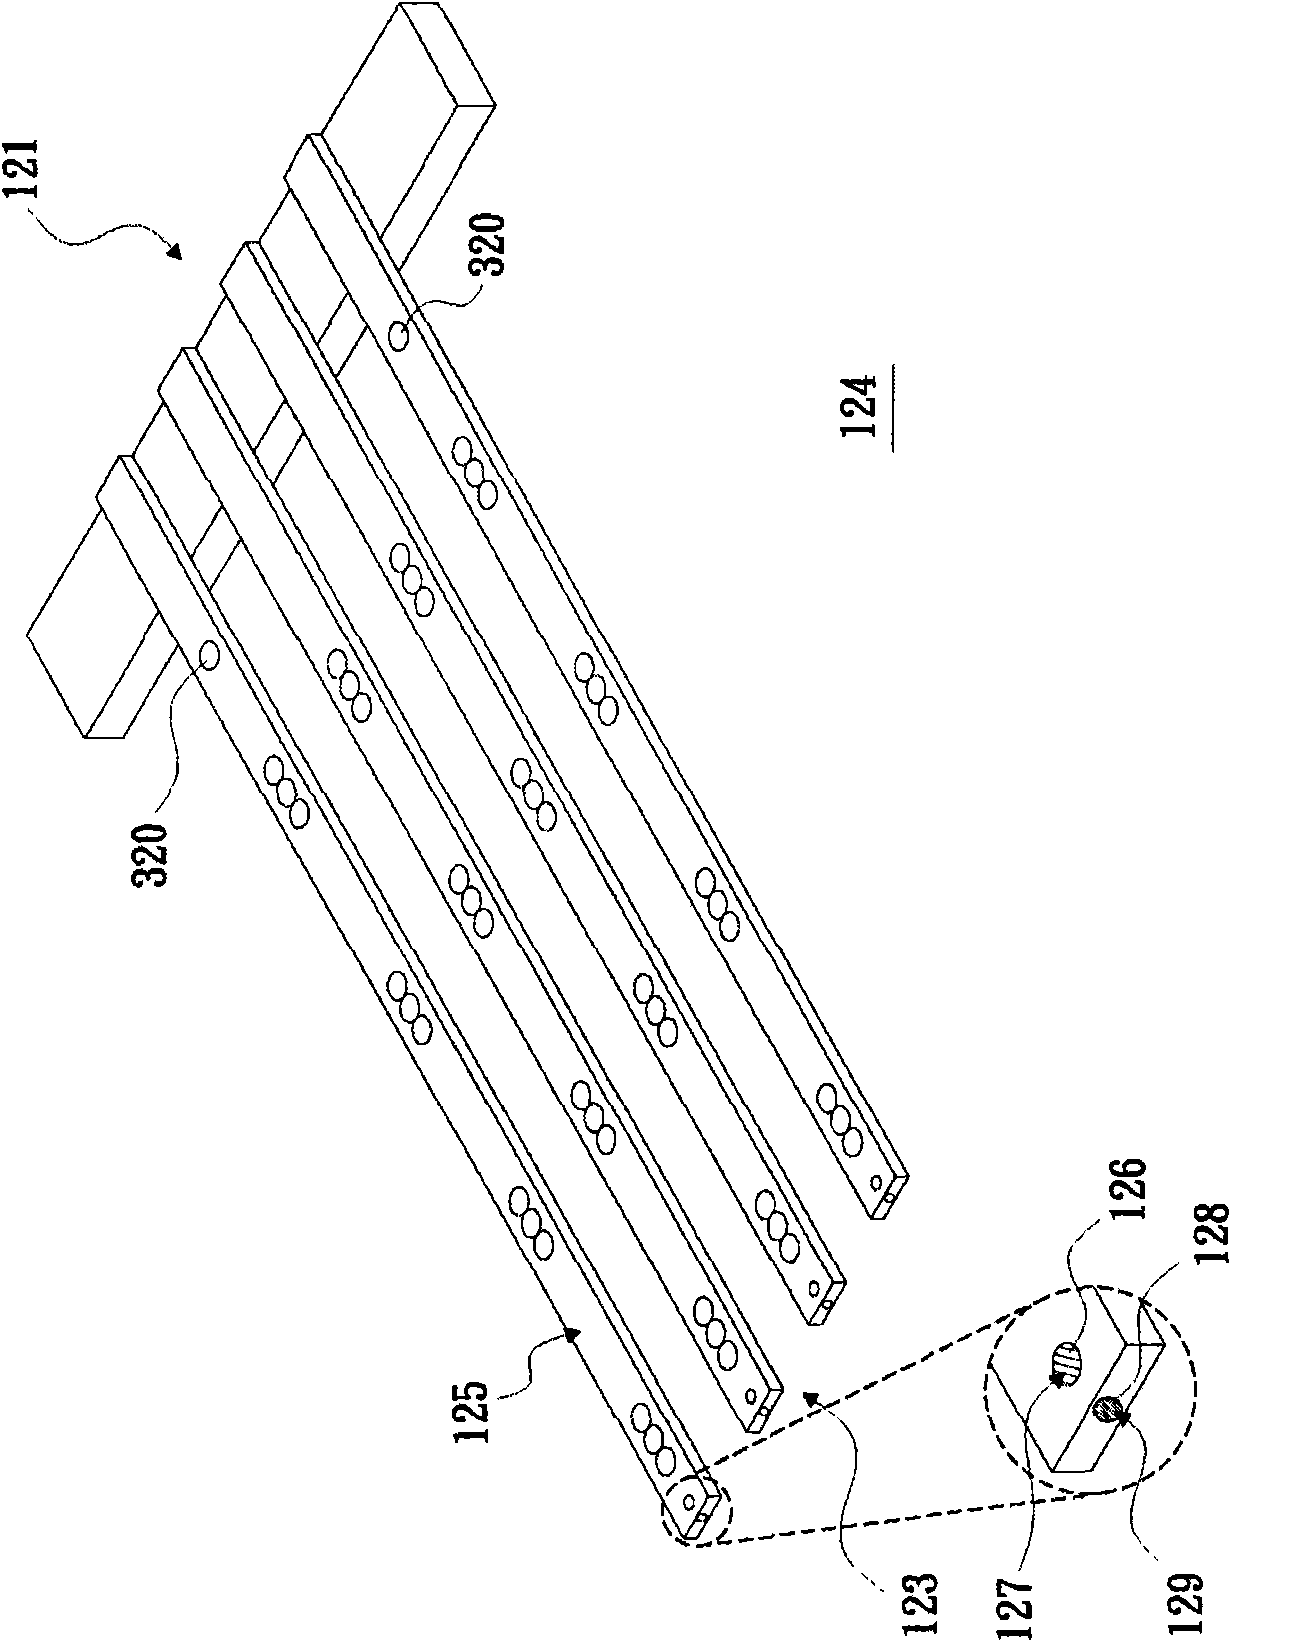 Substrate processing system and substrate carrying device thereof